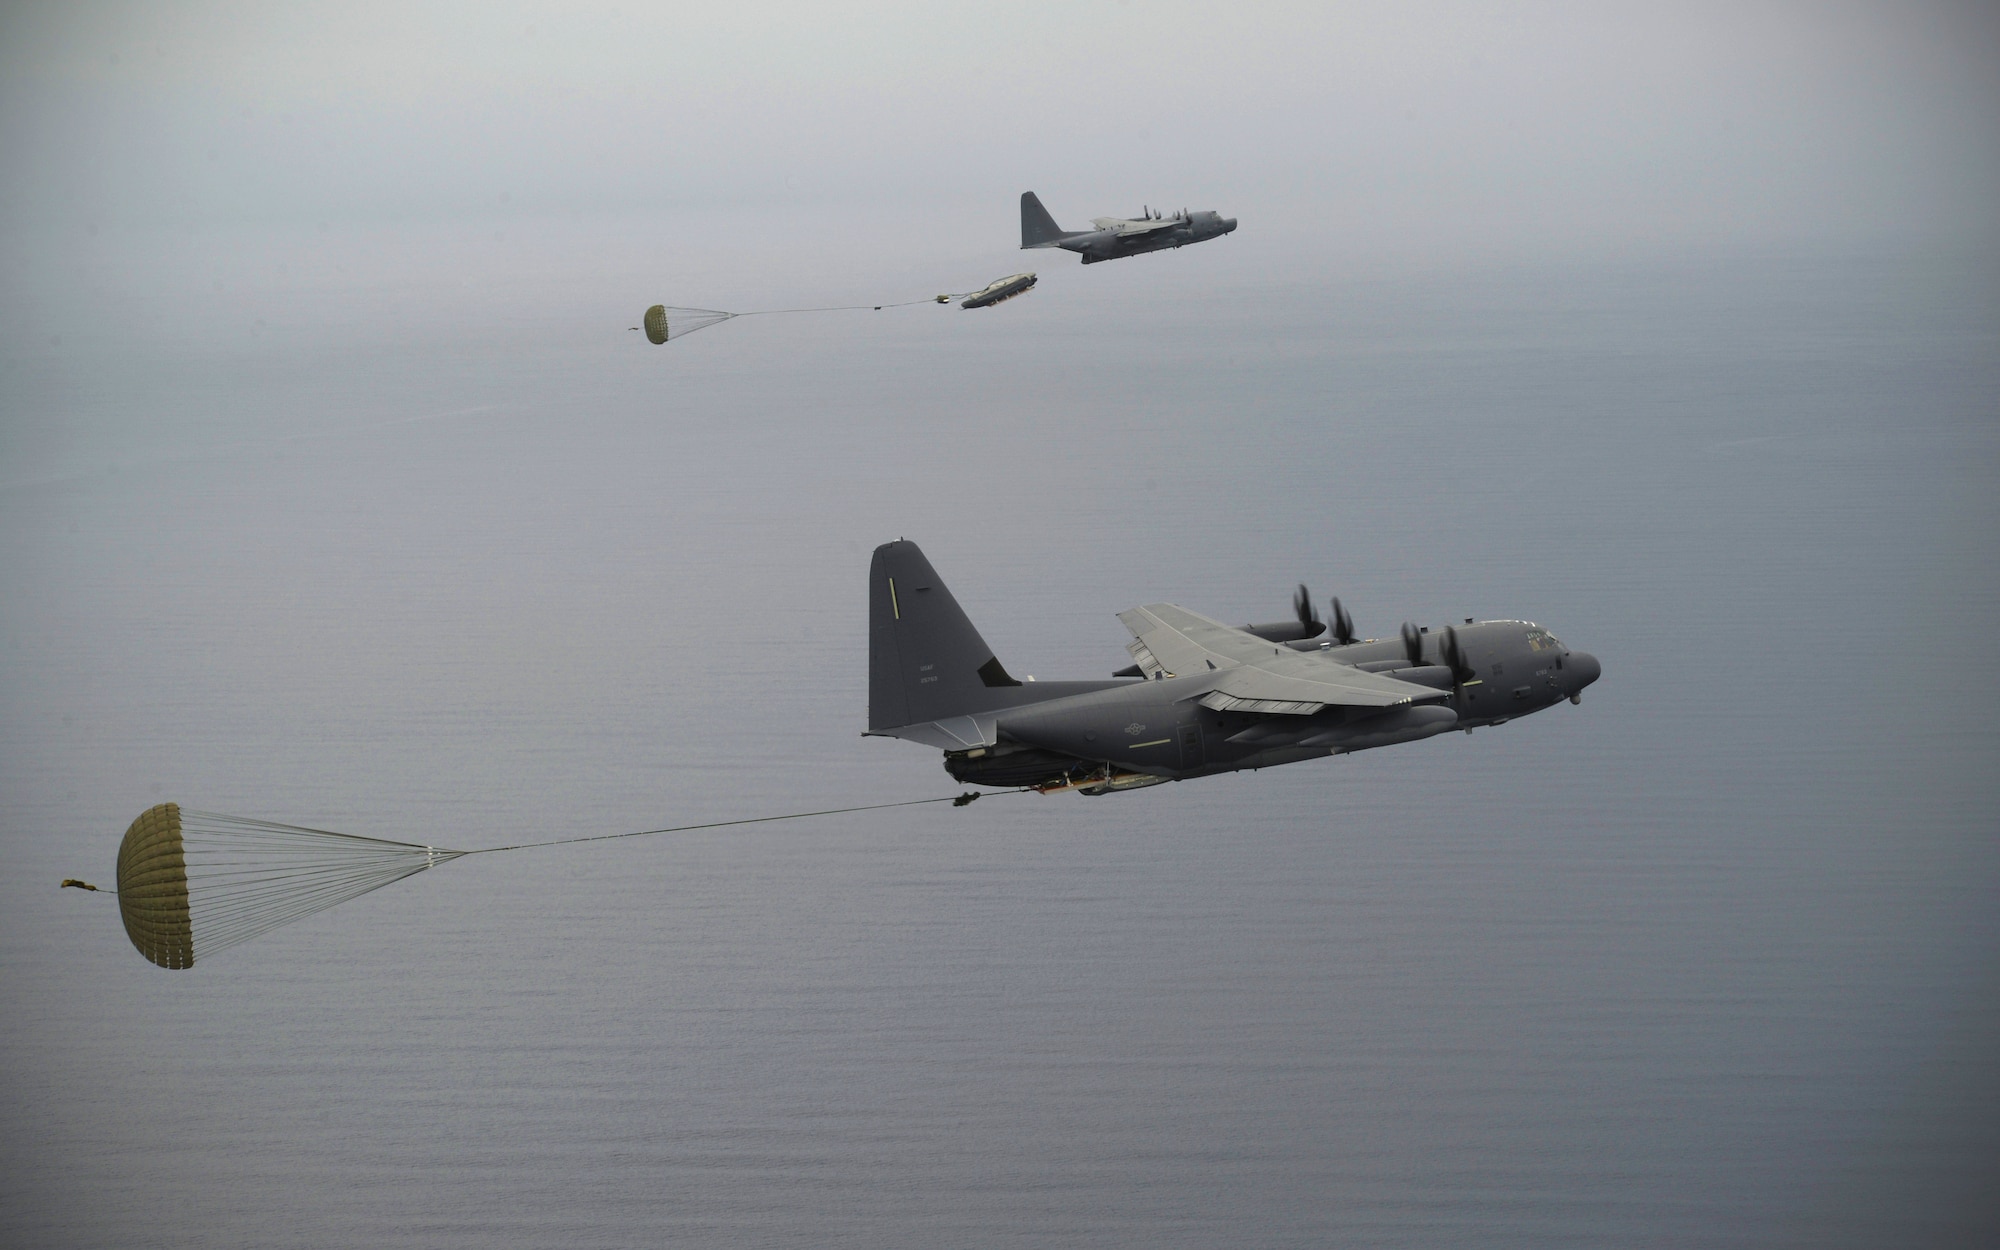 A U.S. Air Force MC-130J and MC-130H crew drop a watercraft and supplies during an exercise Sept. 19, 2015, over the Pacific Ocean.  This was the first time an MC-130J Commando II completed the Maritime Craft Aerial Delivery System airdrop in the Pacific. (U.S. Air Force photo by Airman 1st Class Alexa Ann Henderson)